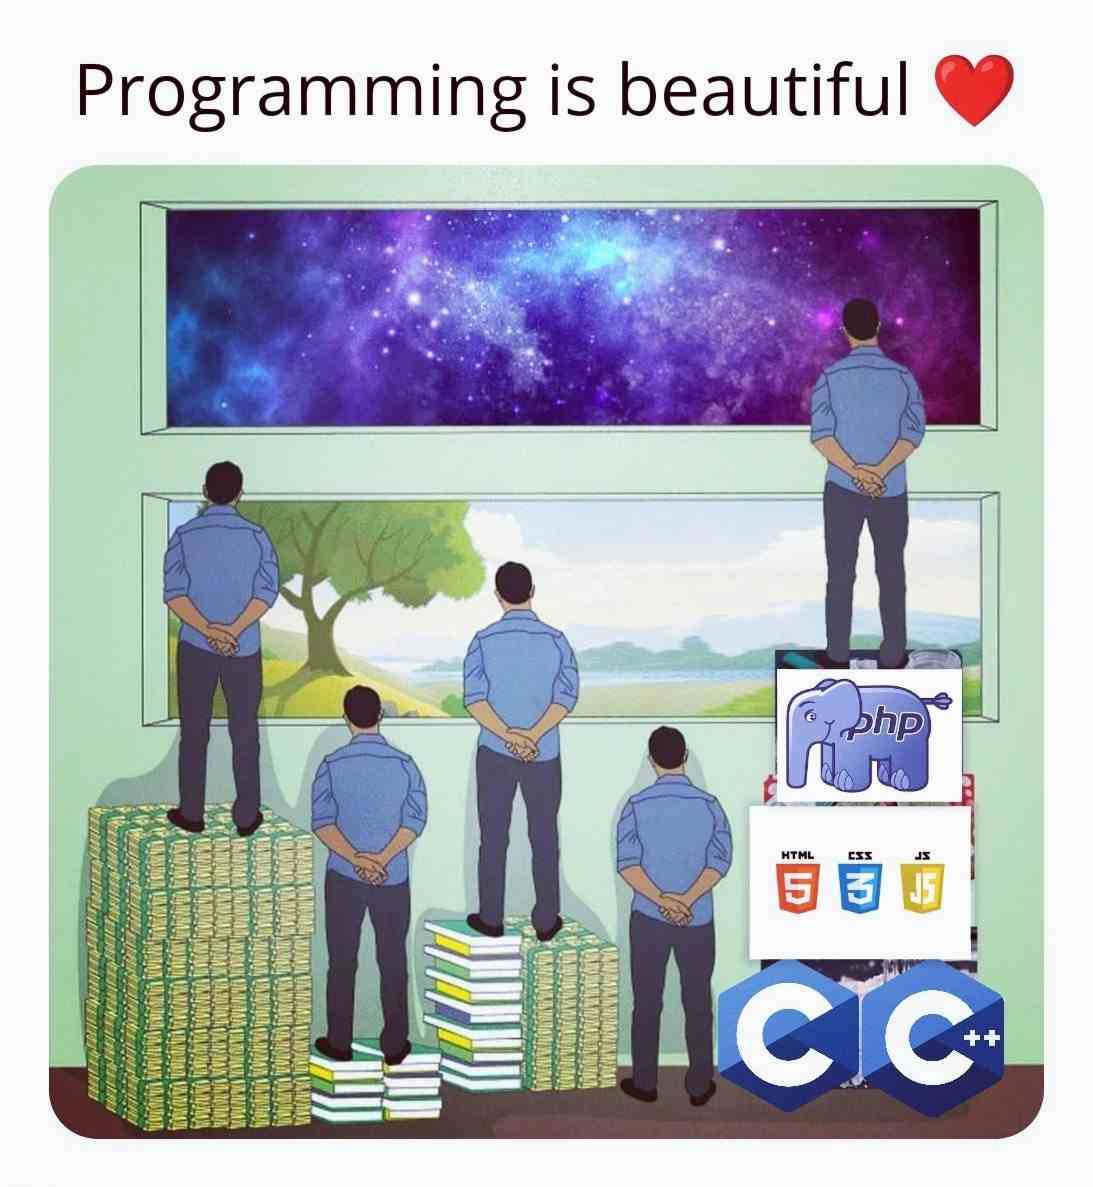 Programming is beautiful if viewed through the eyes of a programmer